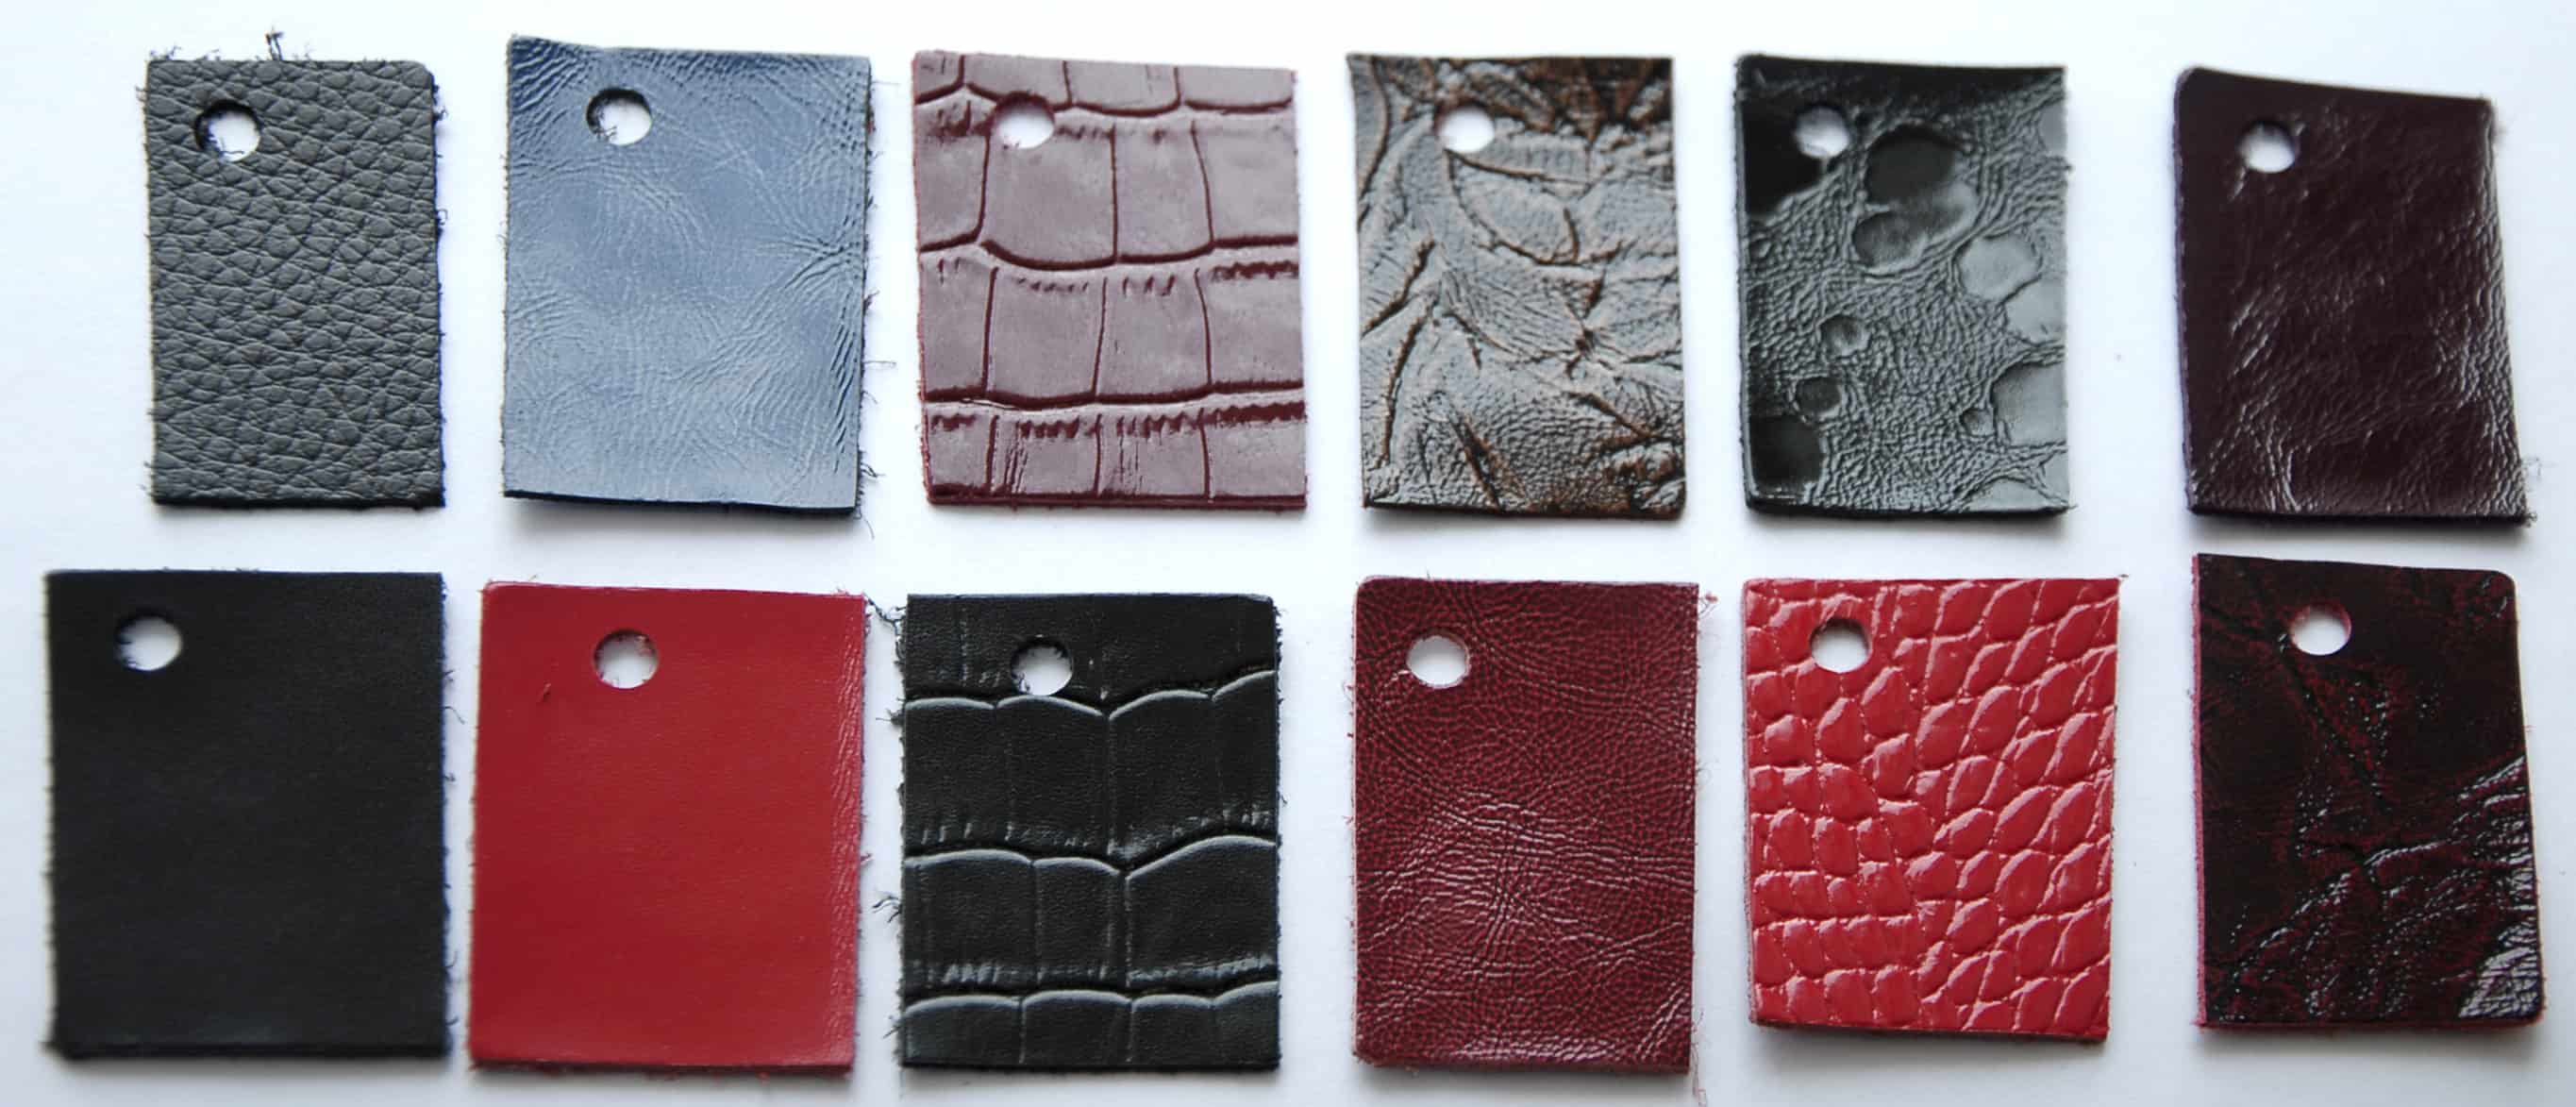 Types of Leather Based on Animal Hide, Finish, and More 